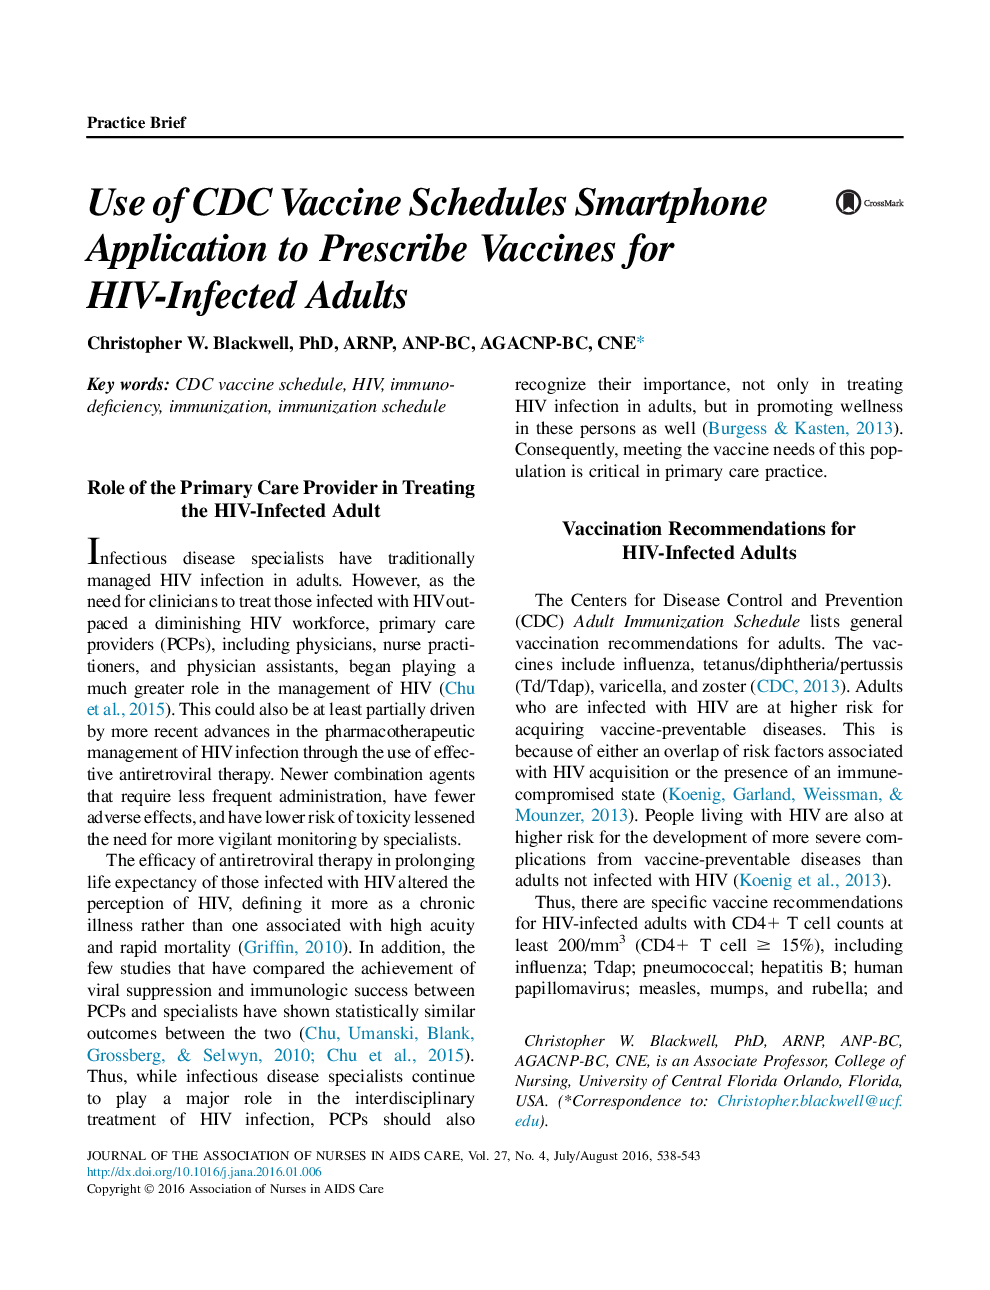 Use of CDC Vaccine Schedules Smartphone Application to Prescribe Vaccines for HIV-Infected Adults